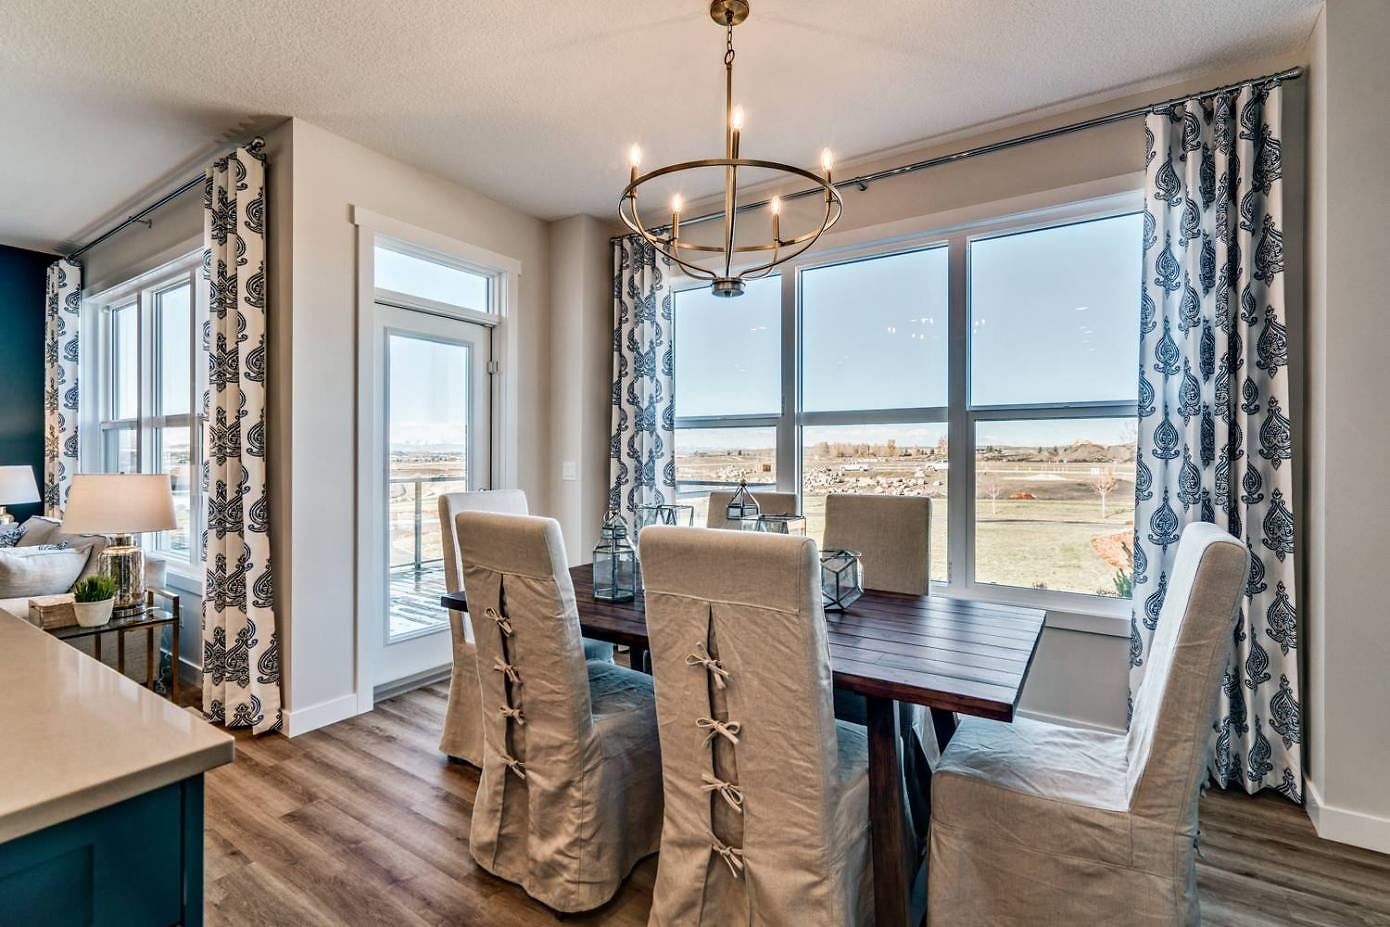 House in Okotoks by Trico Homes